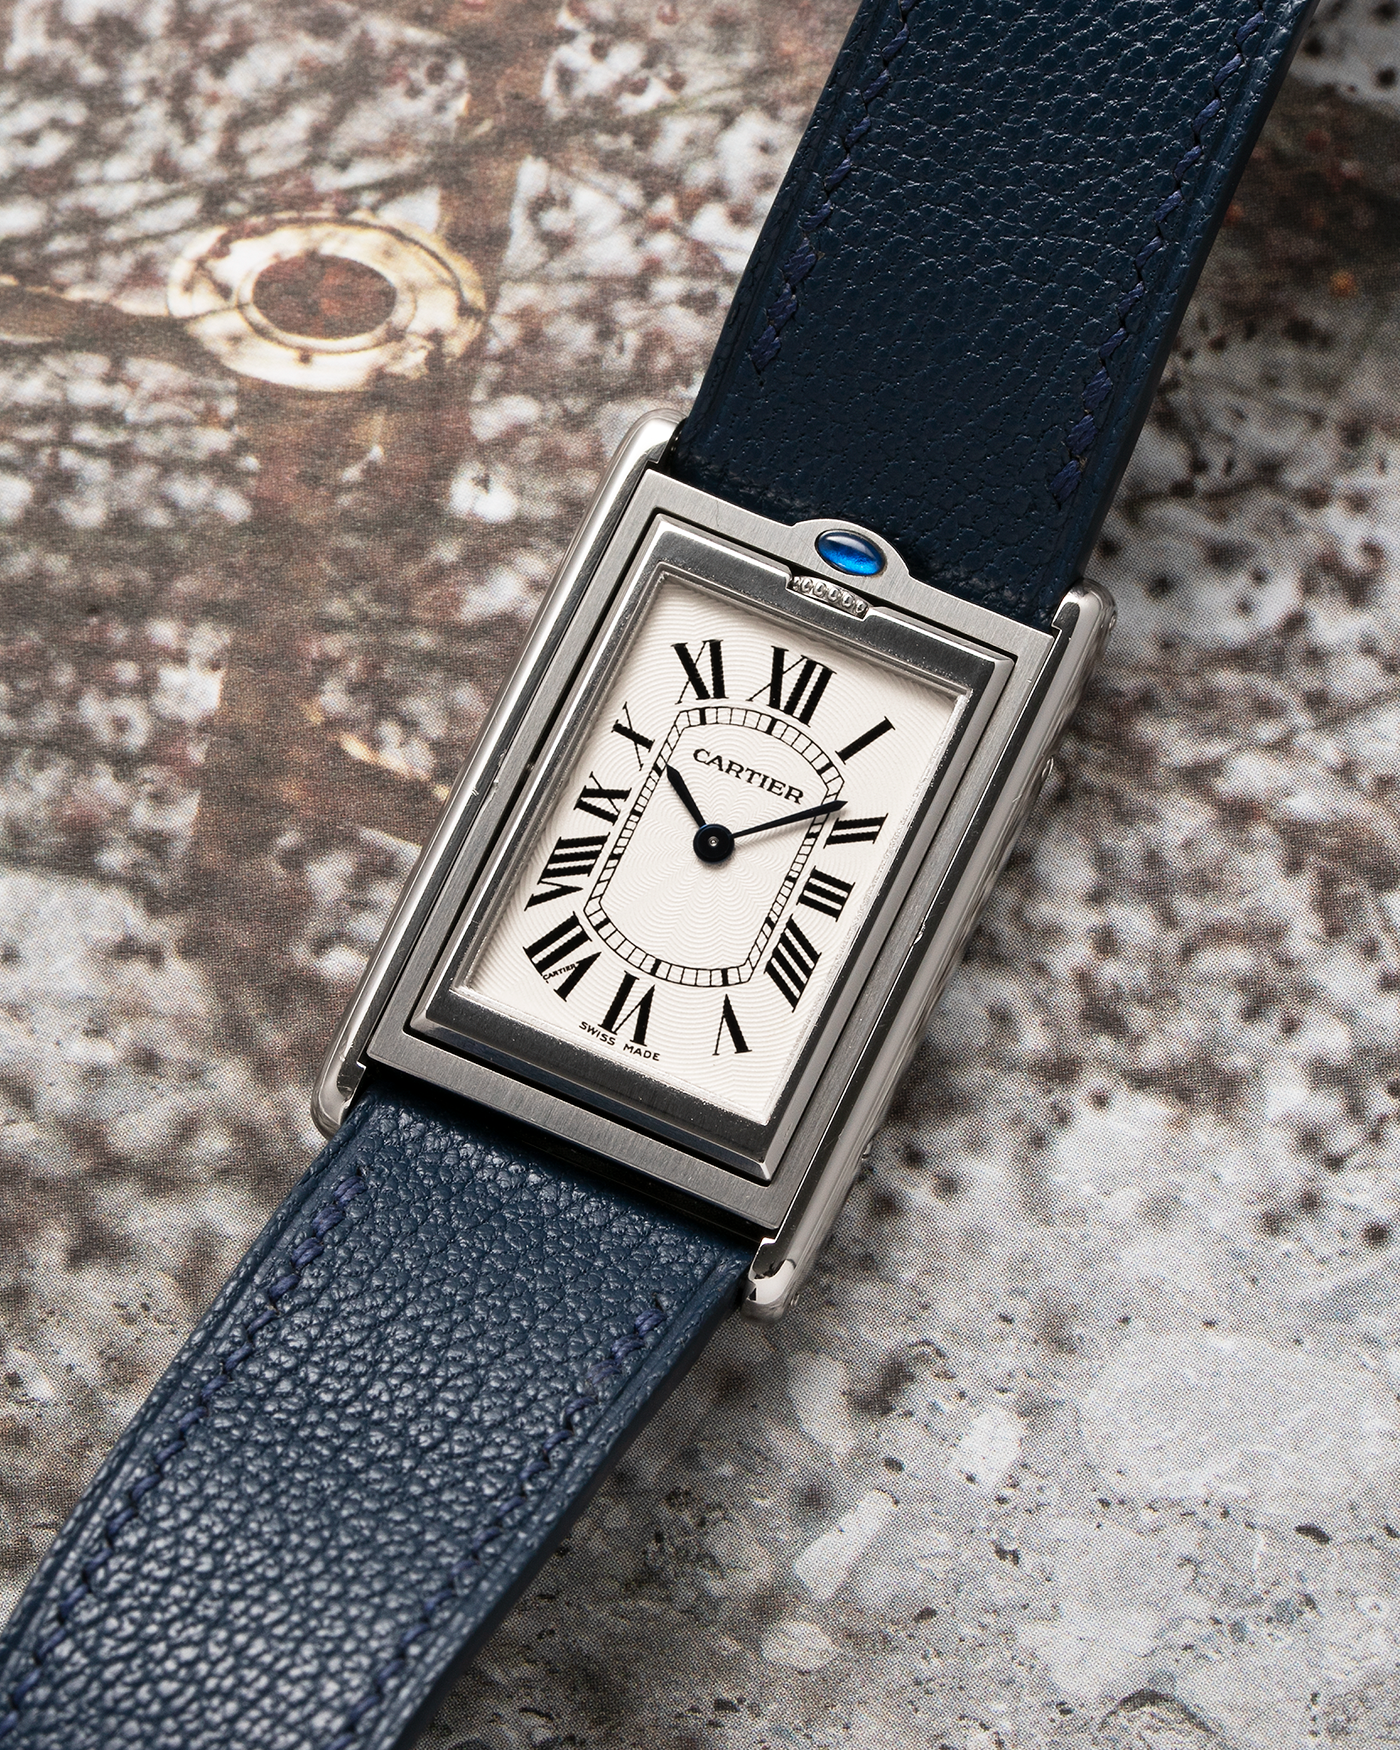 Brand: Cartier Year: 1990’s Model: Tank Basculante Reference: 2390 Material: Stainless Steel Movement: Piguet-derived Cartier Cal. 050 MC, Manual-Winding Case Diameter: 26mm x 38mm Strap: Alexandre Ritz Navy Blue Calf Leather Strap with Signed Stainless Steel Tang Buckle